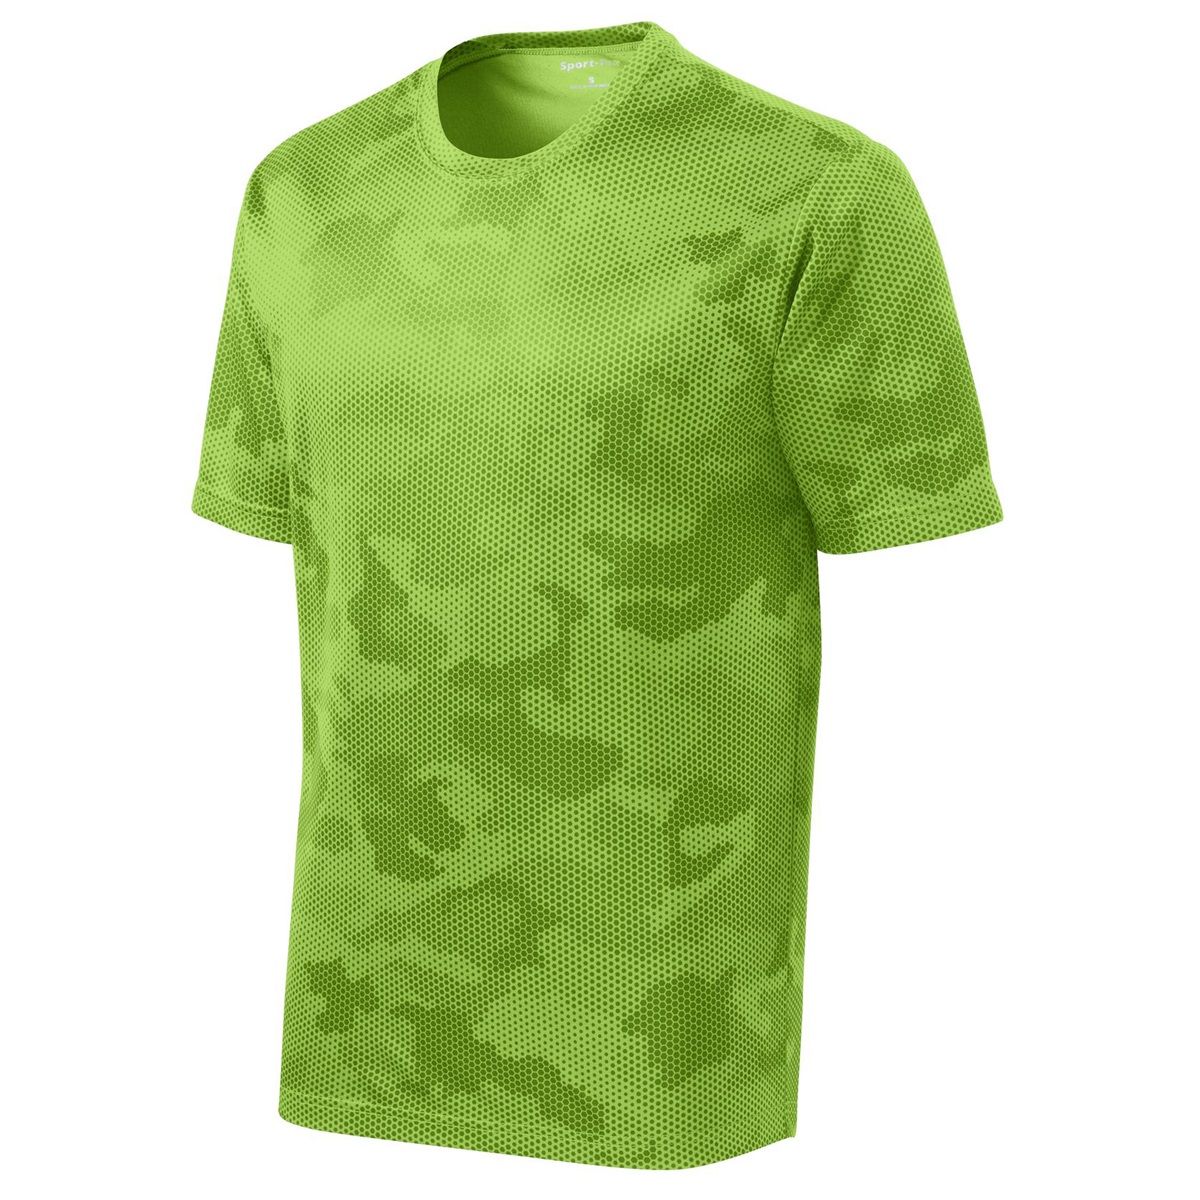 Sport-Tek YST370 Youth CamoHex Tee - Lime Shock | Full Source